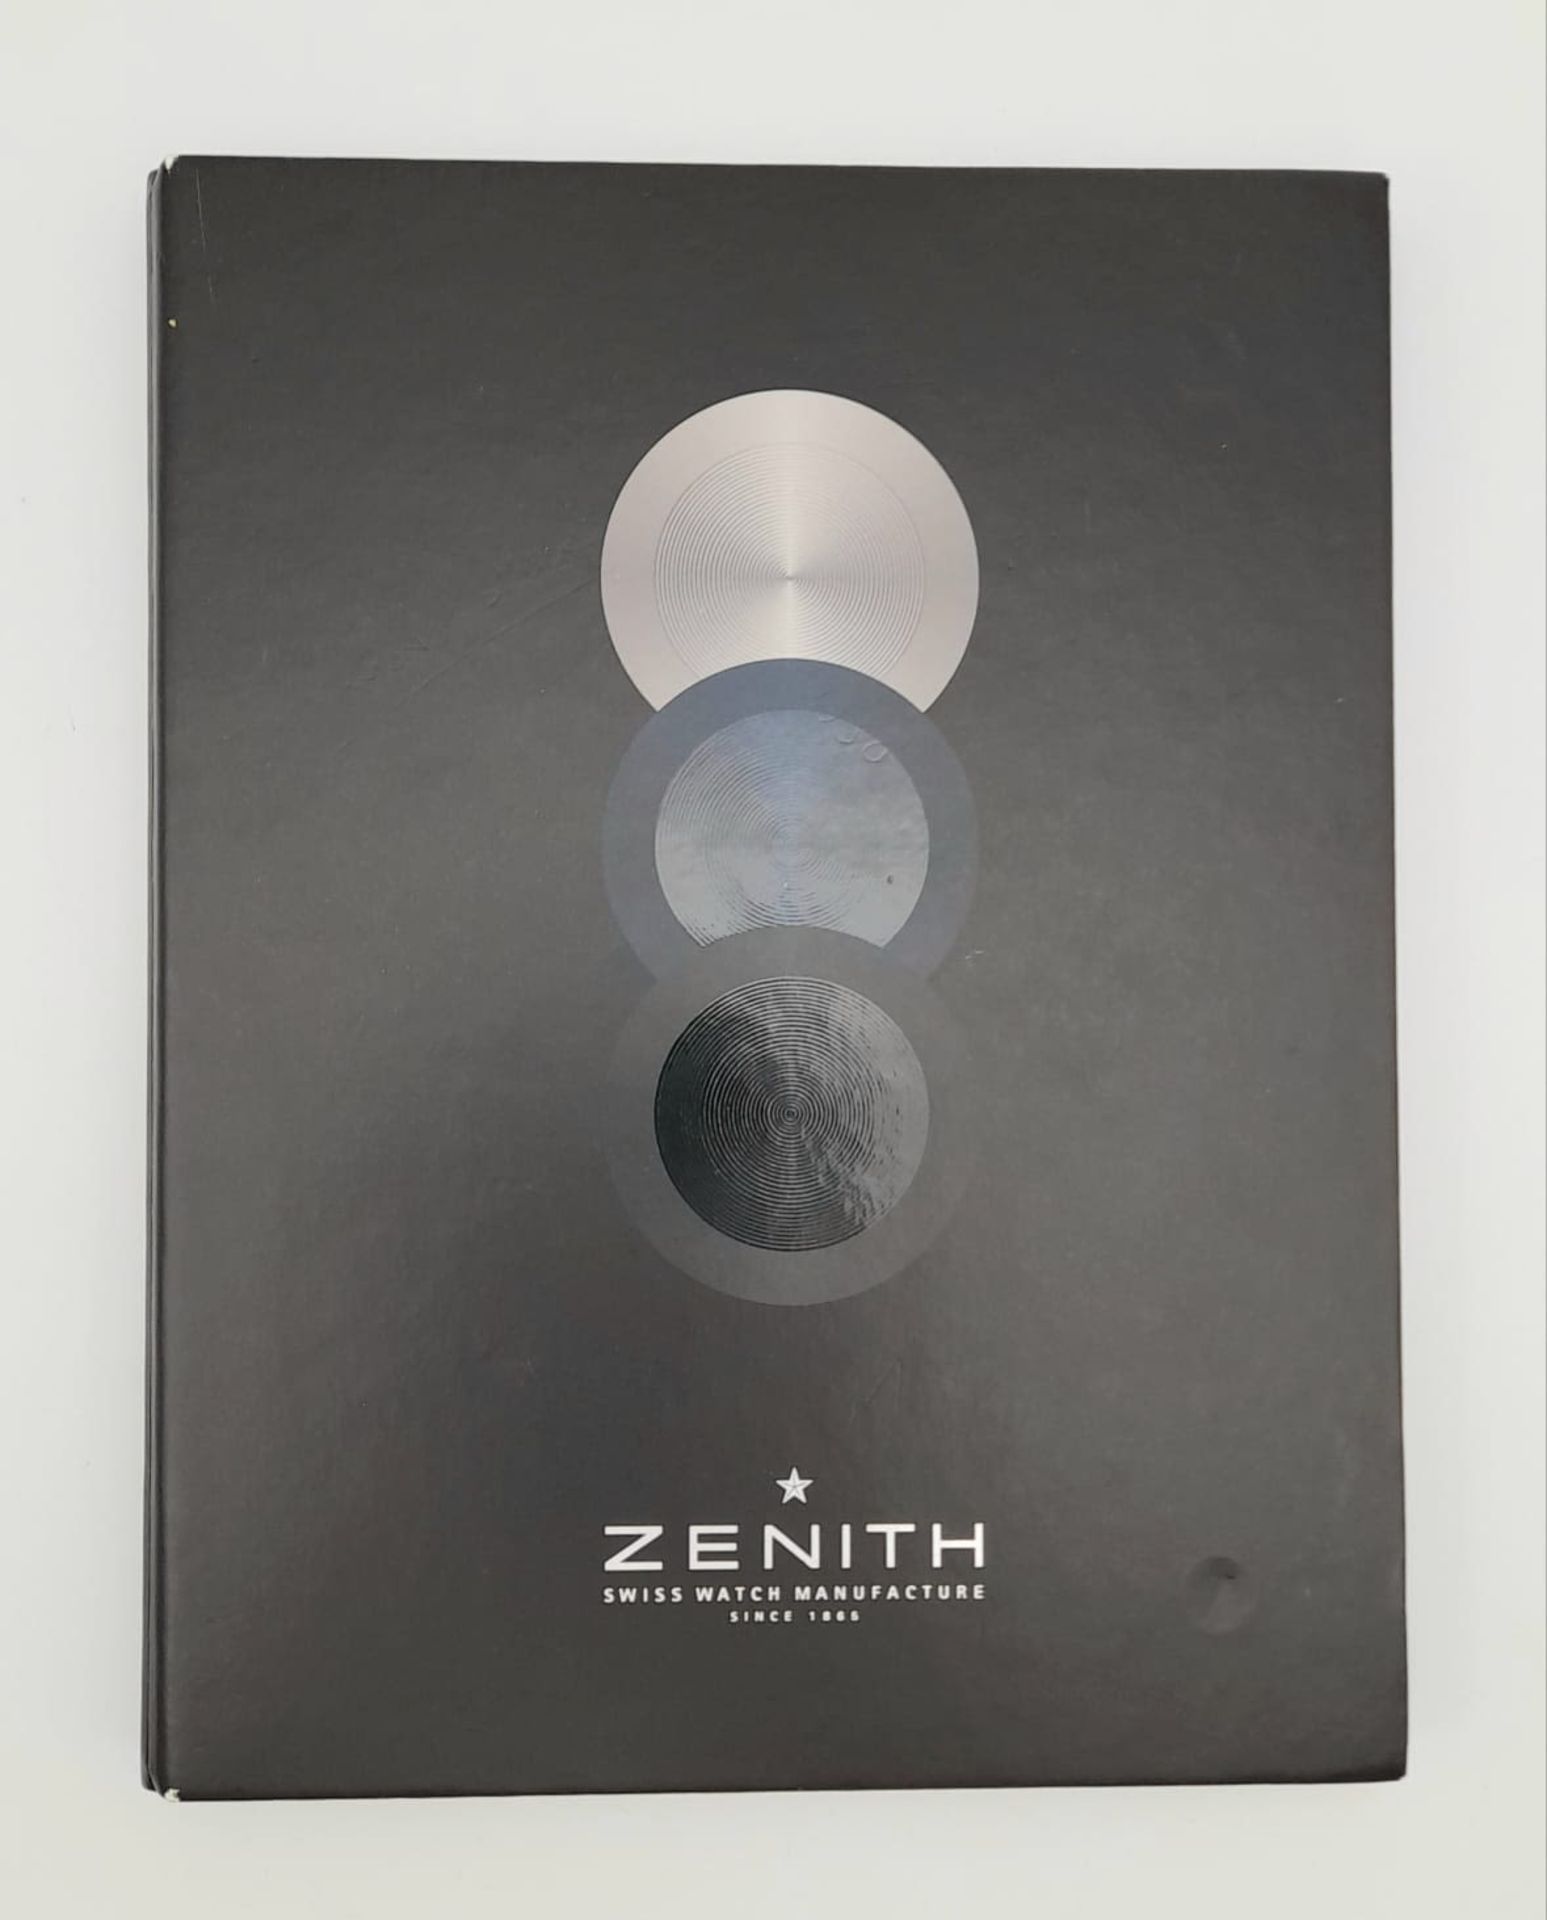 COLLECTION OF 2X ZENITH WATCH COMPANY NOTEBOOKS WITH A ZENITH BOOKMARK - Image 5 of 16